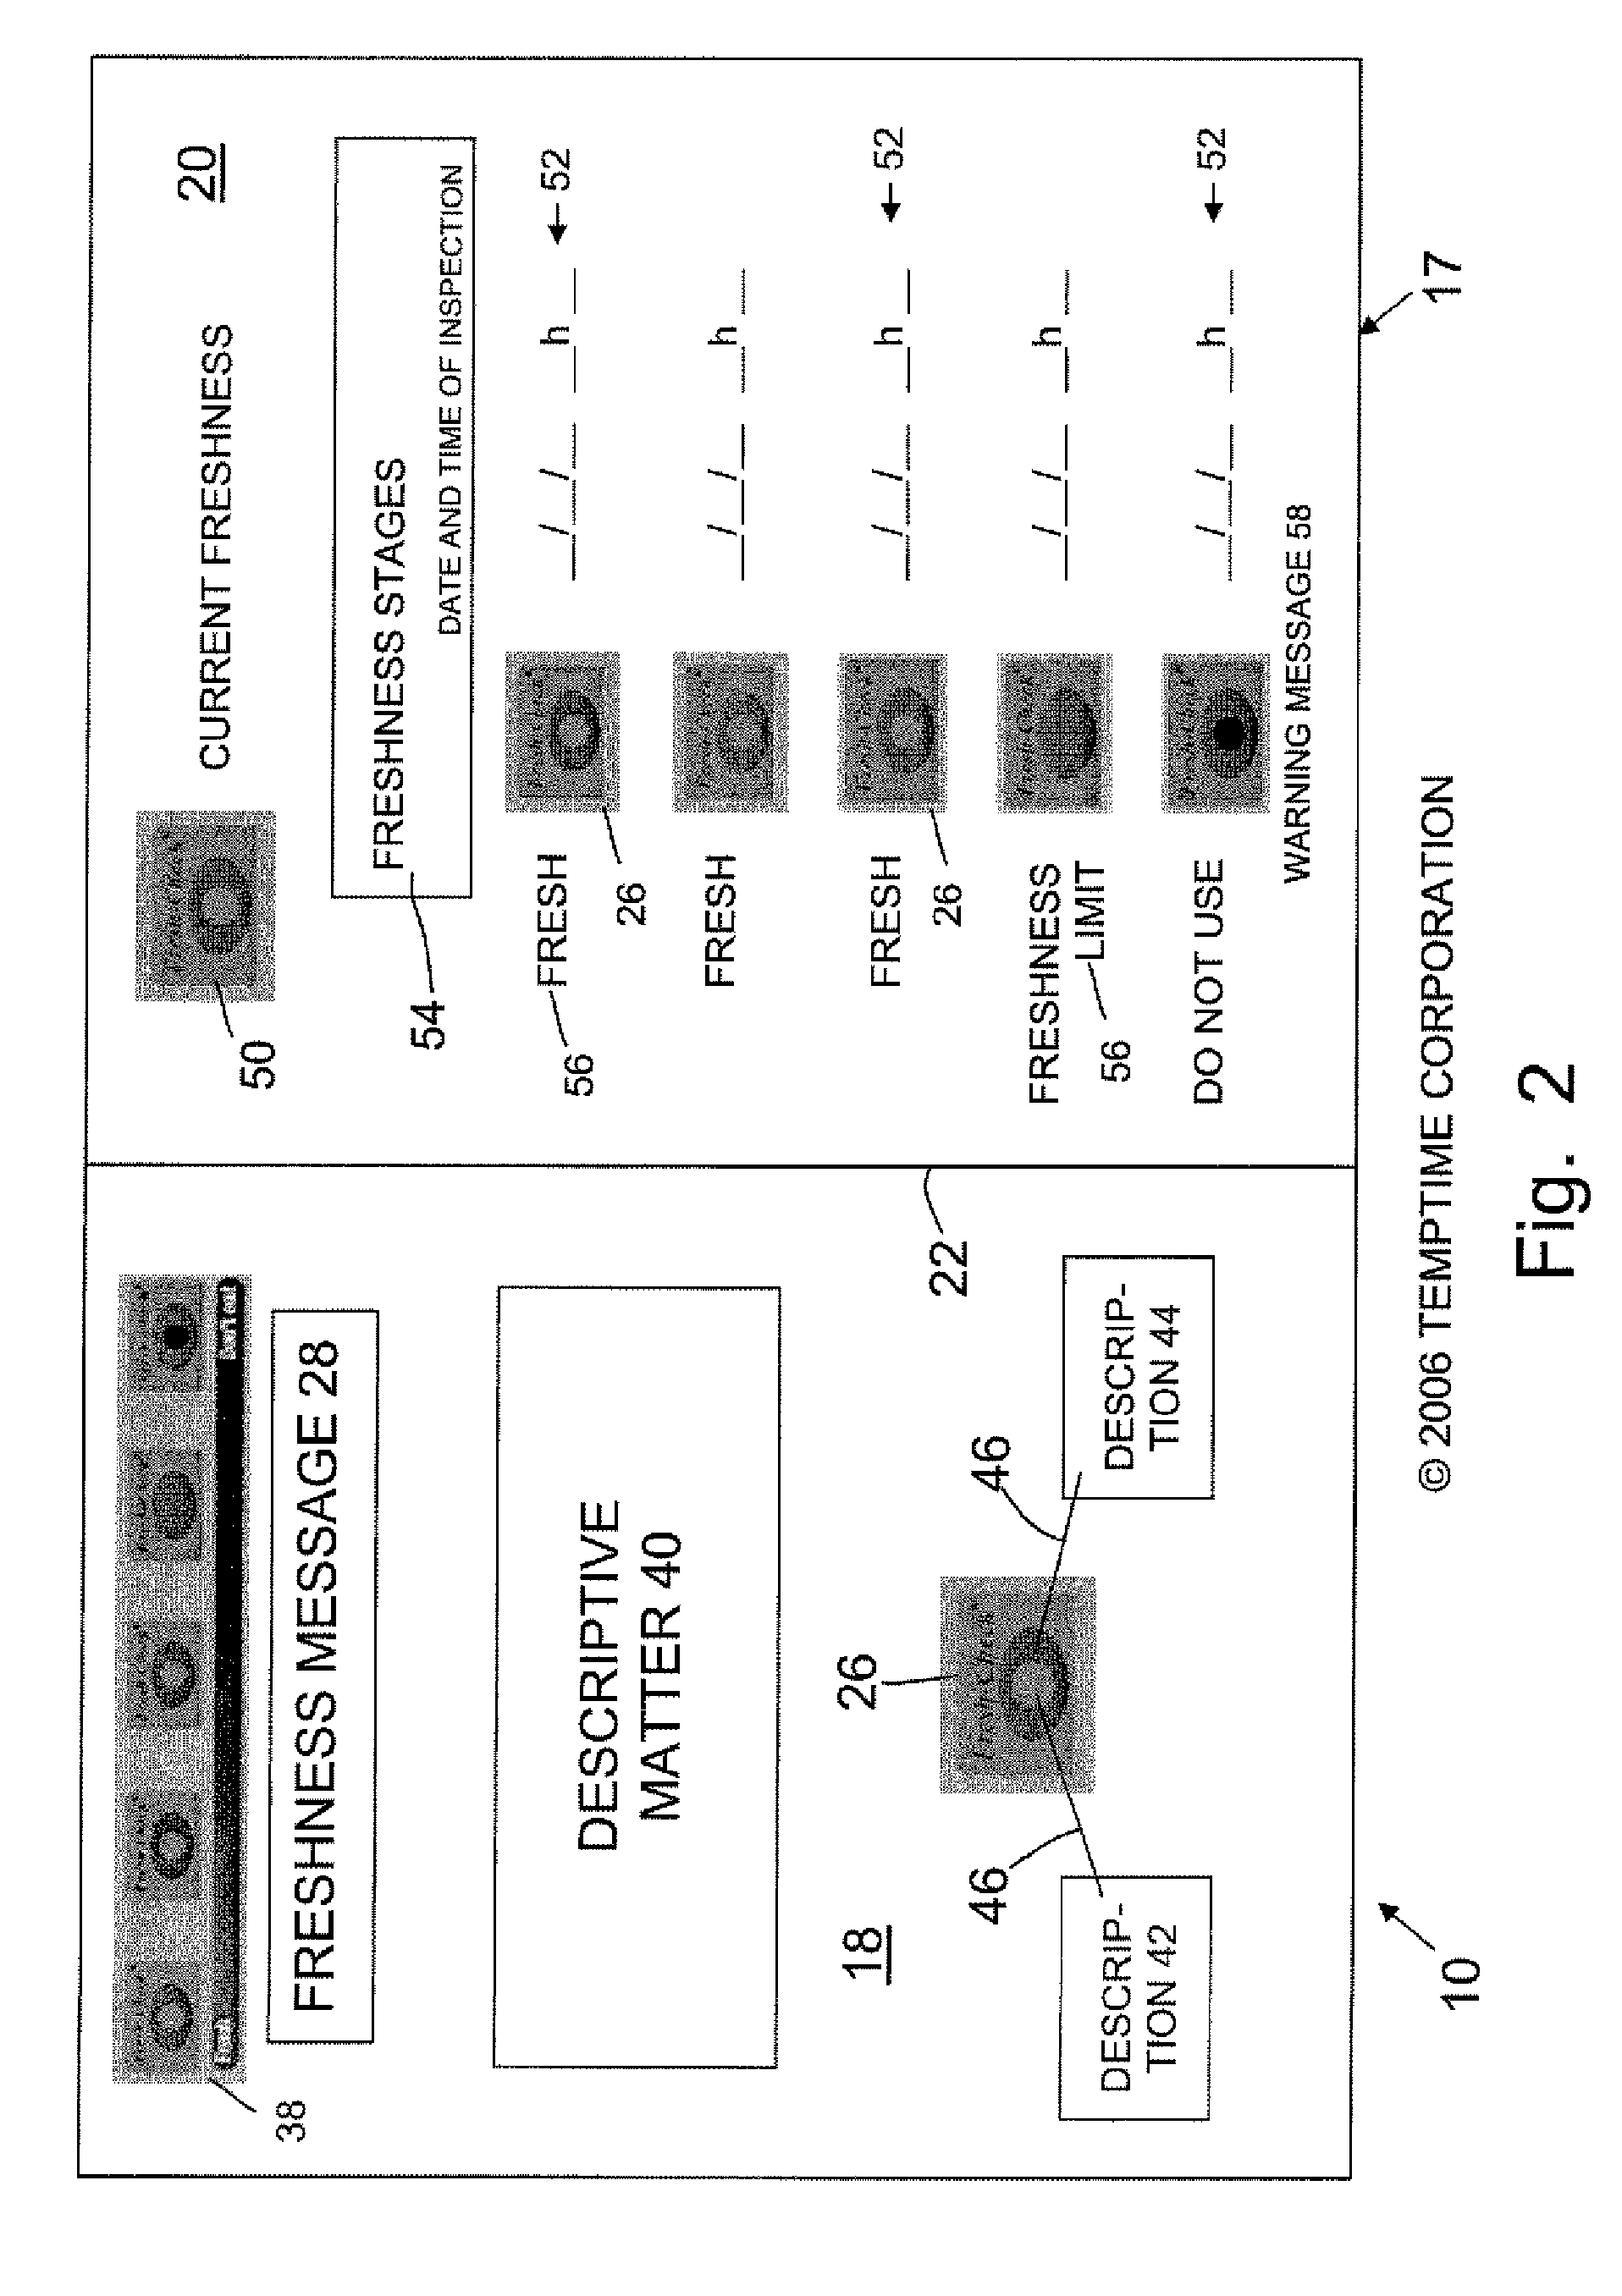 Quality assurance system and methods of use